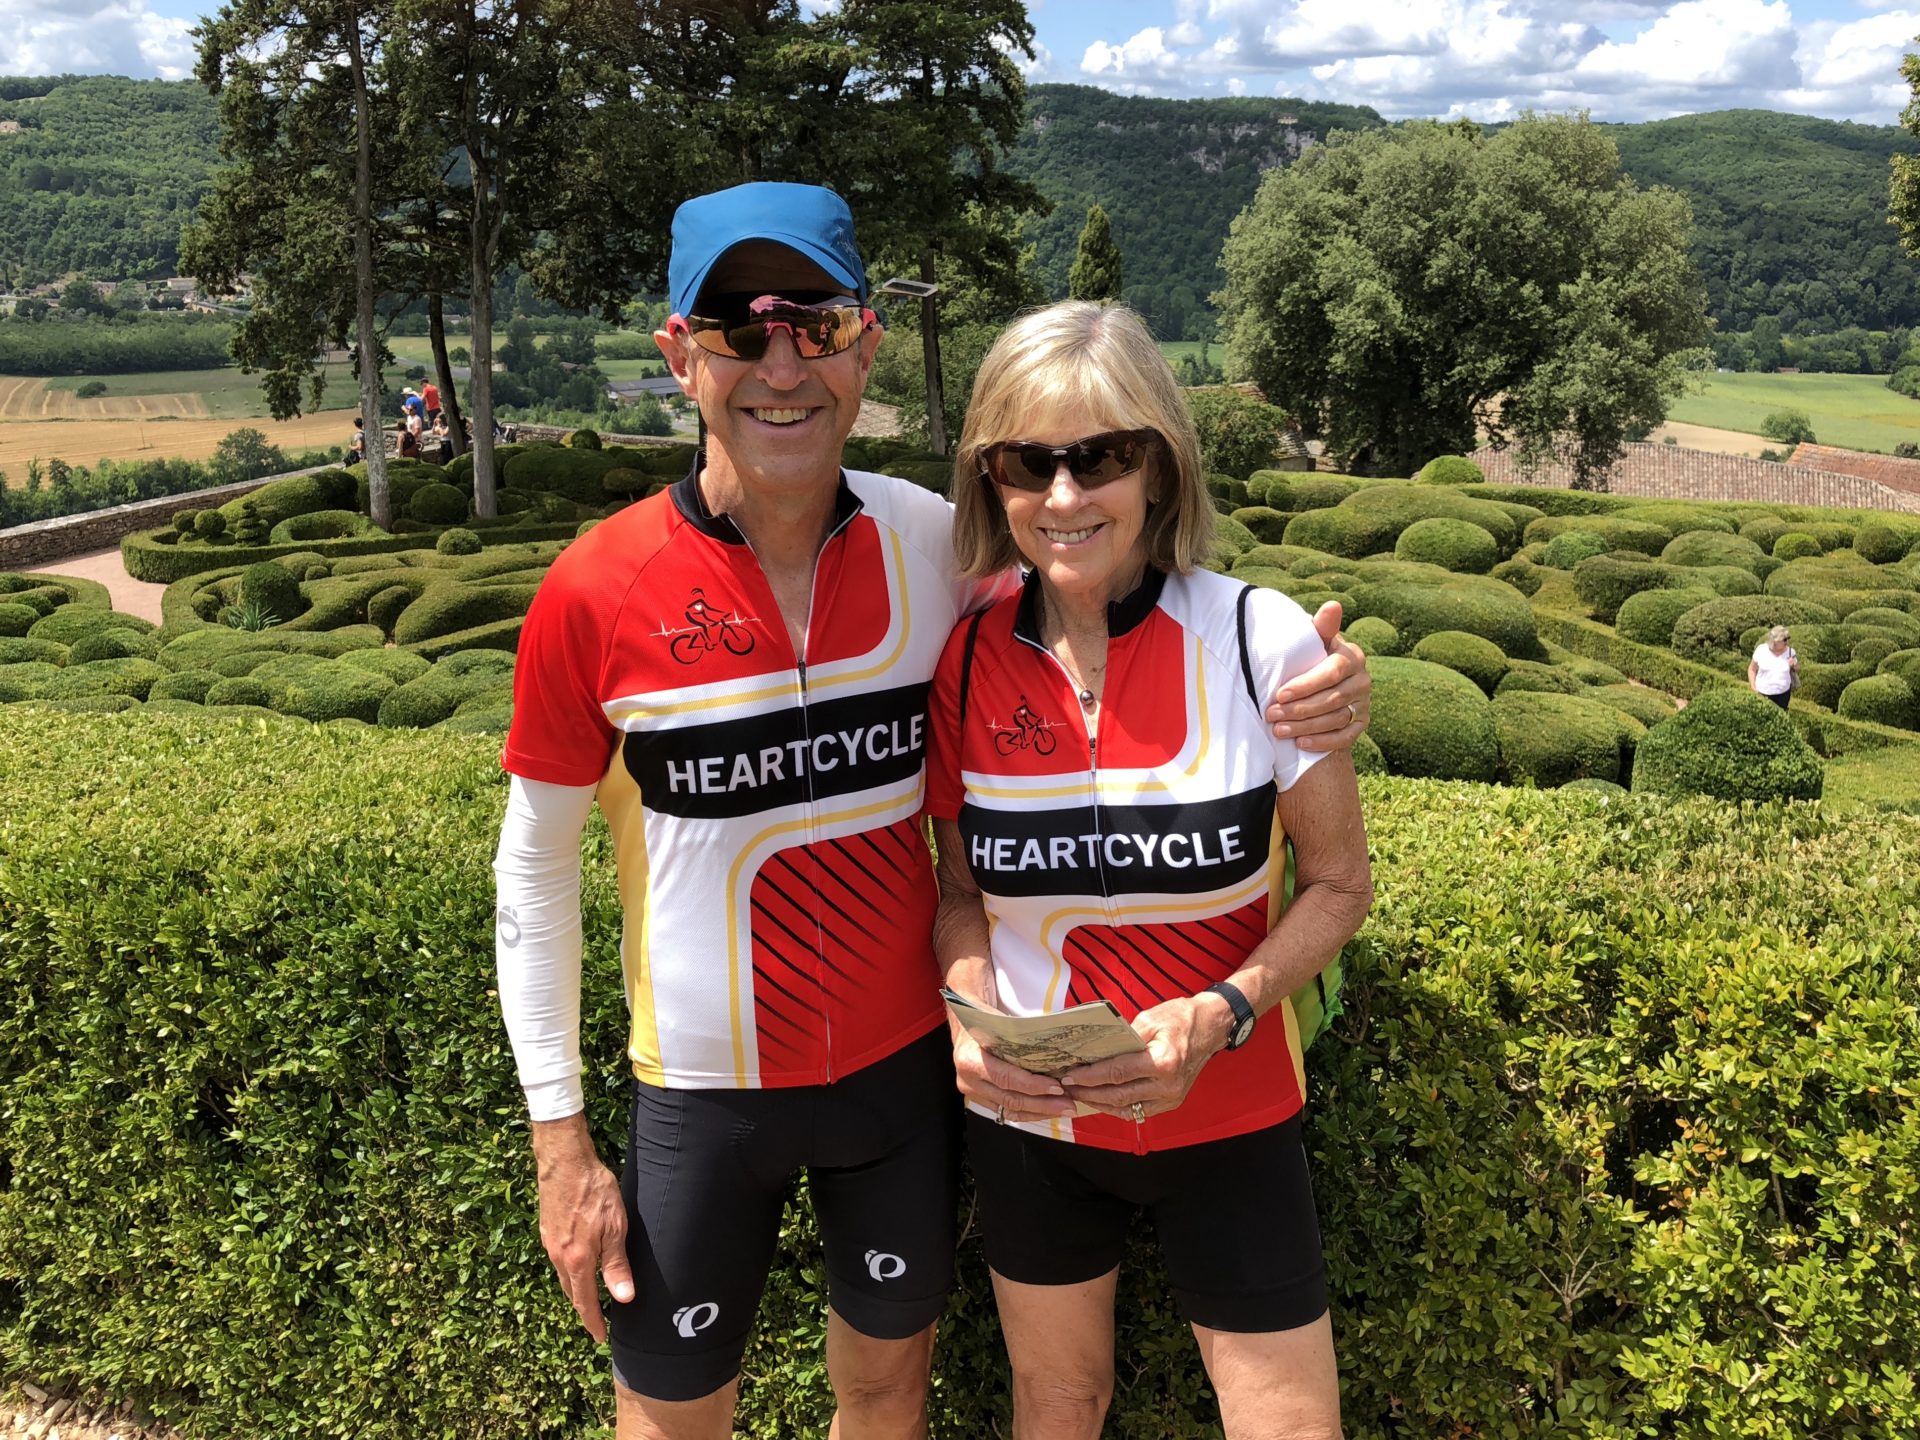 A white man and woman pose wearing cycling jerseys and sunglasses. They are photographed from the knees up. They are standing in front of shrubs.